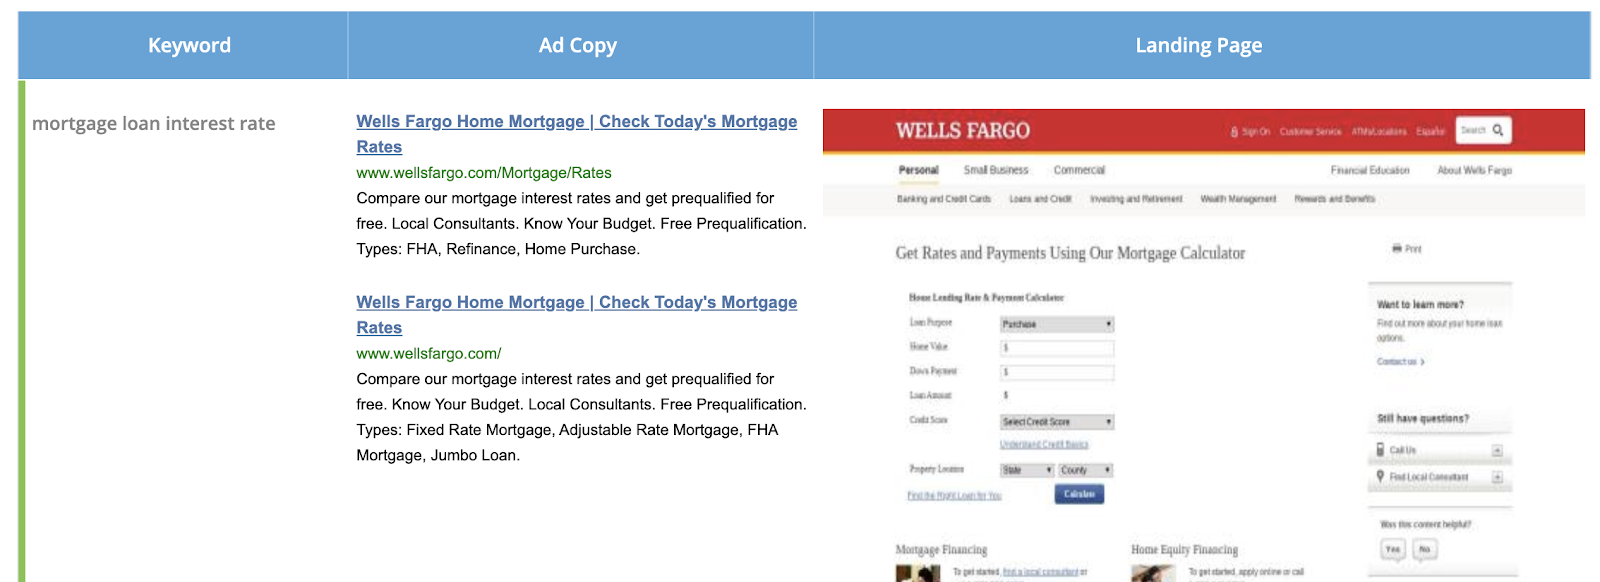 Keyword: "mortage loan interest rate" along with ad copy and landing page.